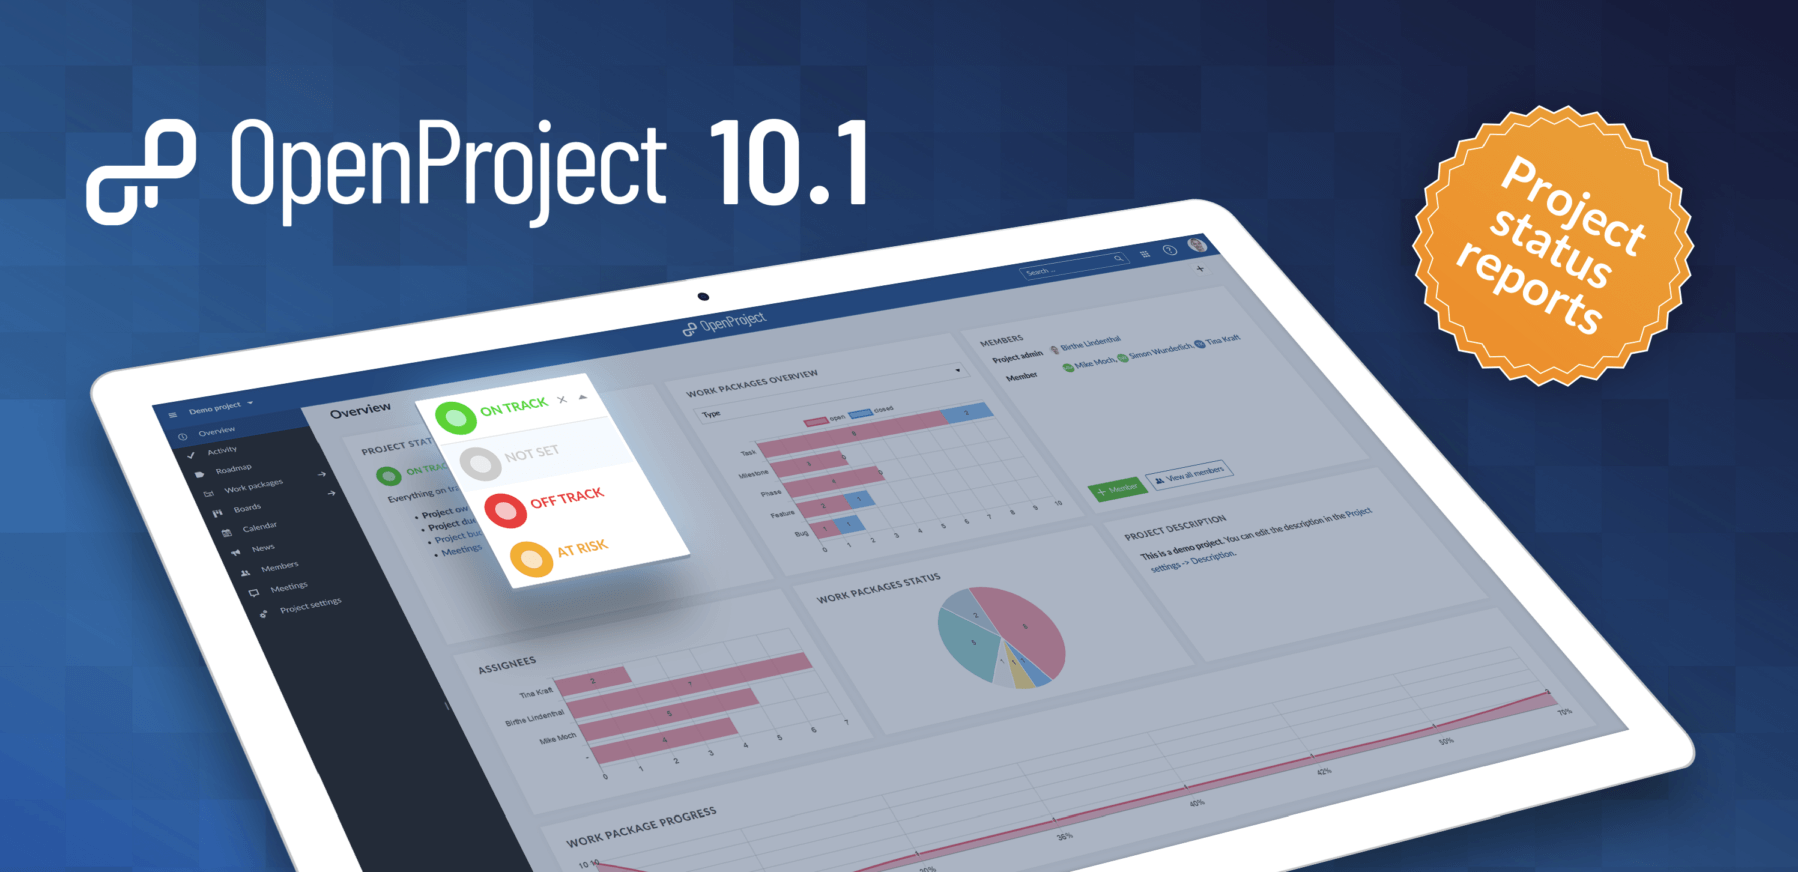 Project status reporting